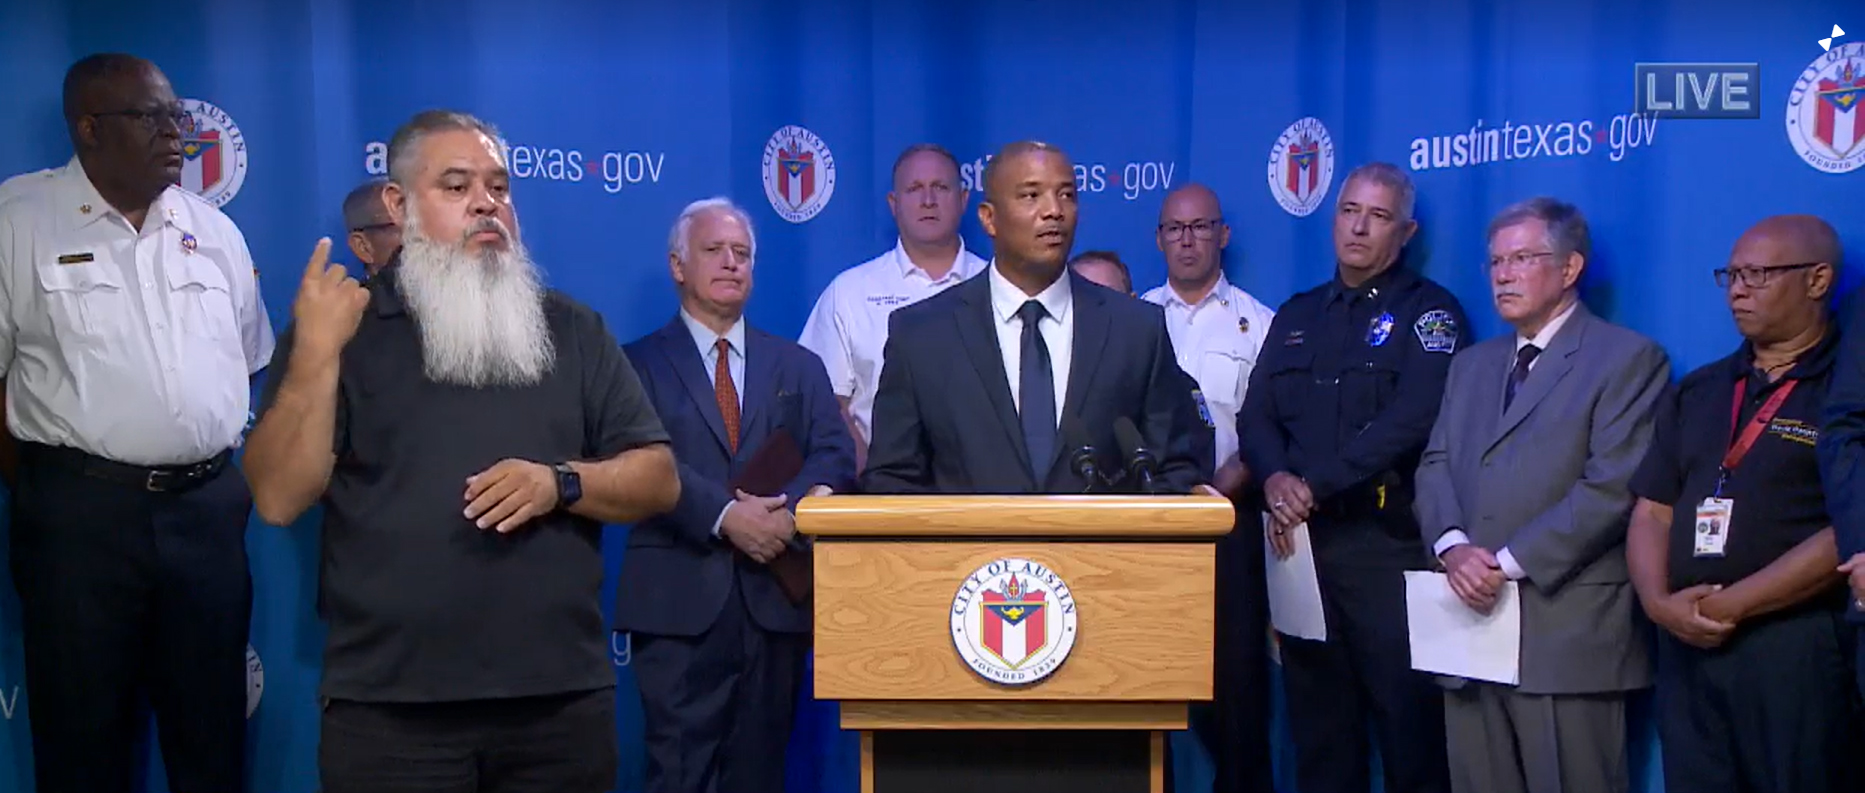 Multiple city officials standing behind a podium in front of a City of Austin backdrop. A black male stands at podium speaking.